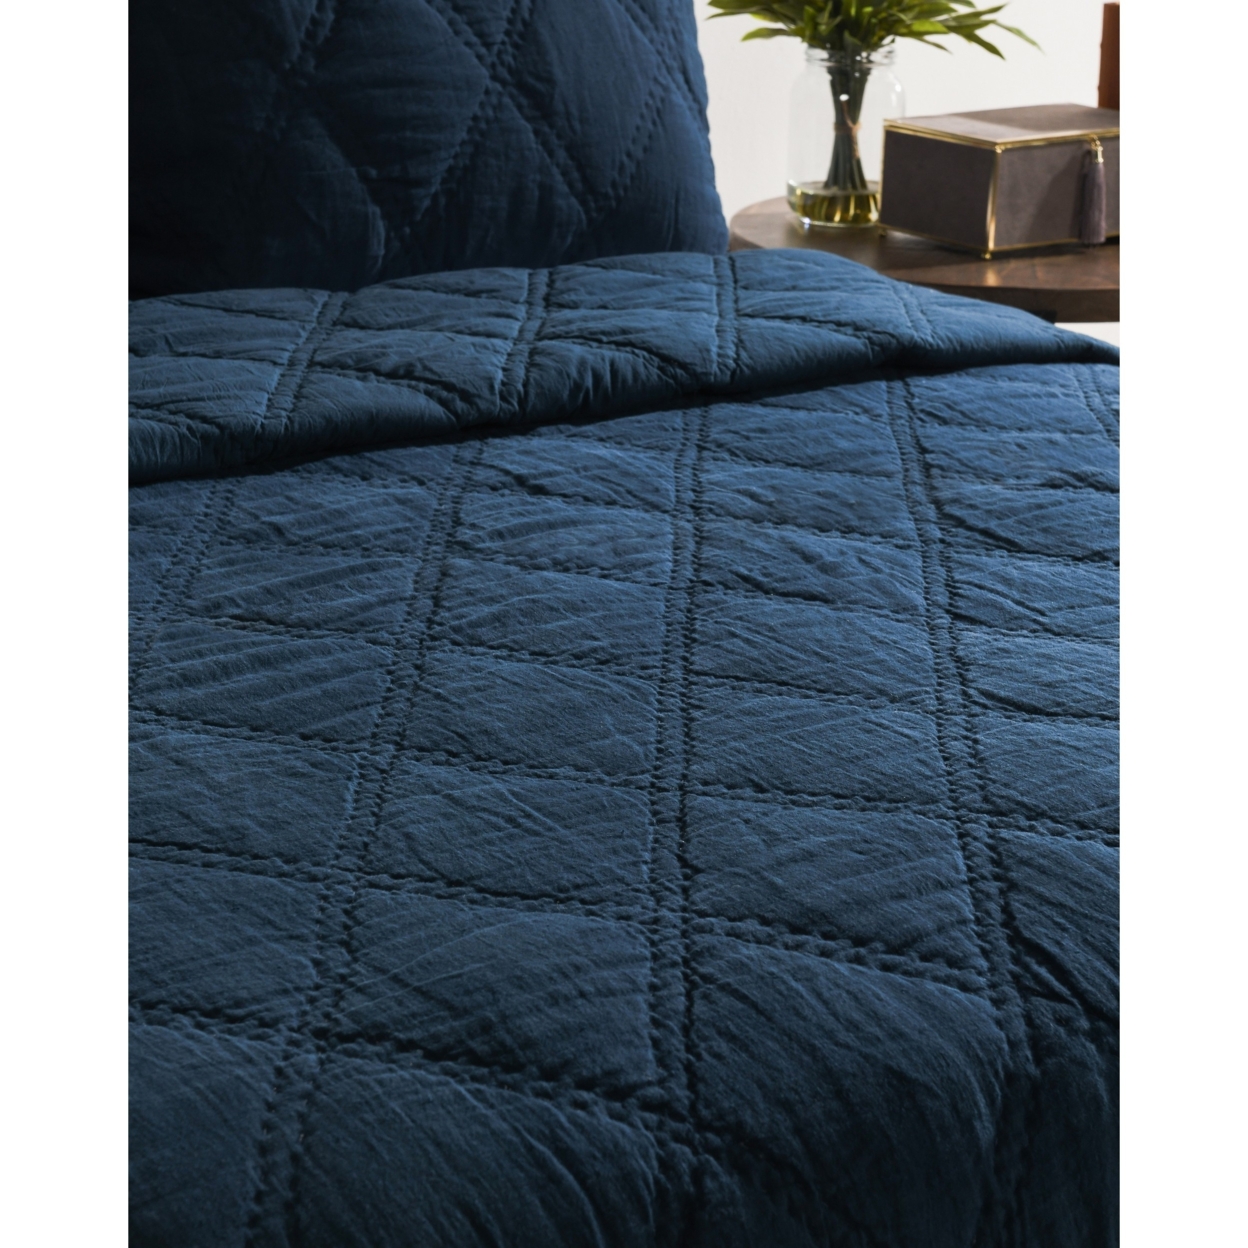 Hara Hand Quilted King Size Flax Linen Quilt With Polyester Fill, Dark Blue- Saltoro Sherpi